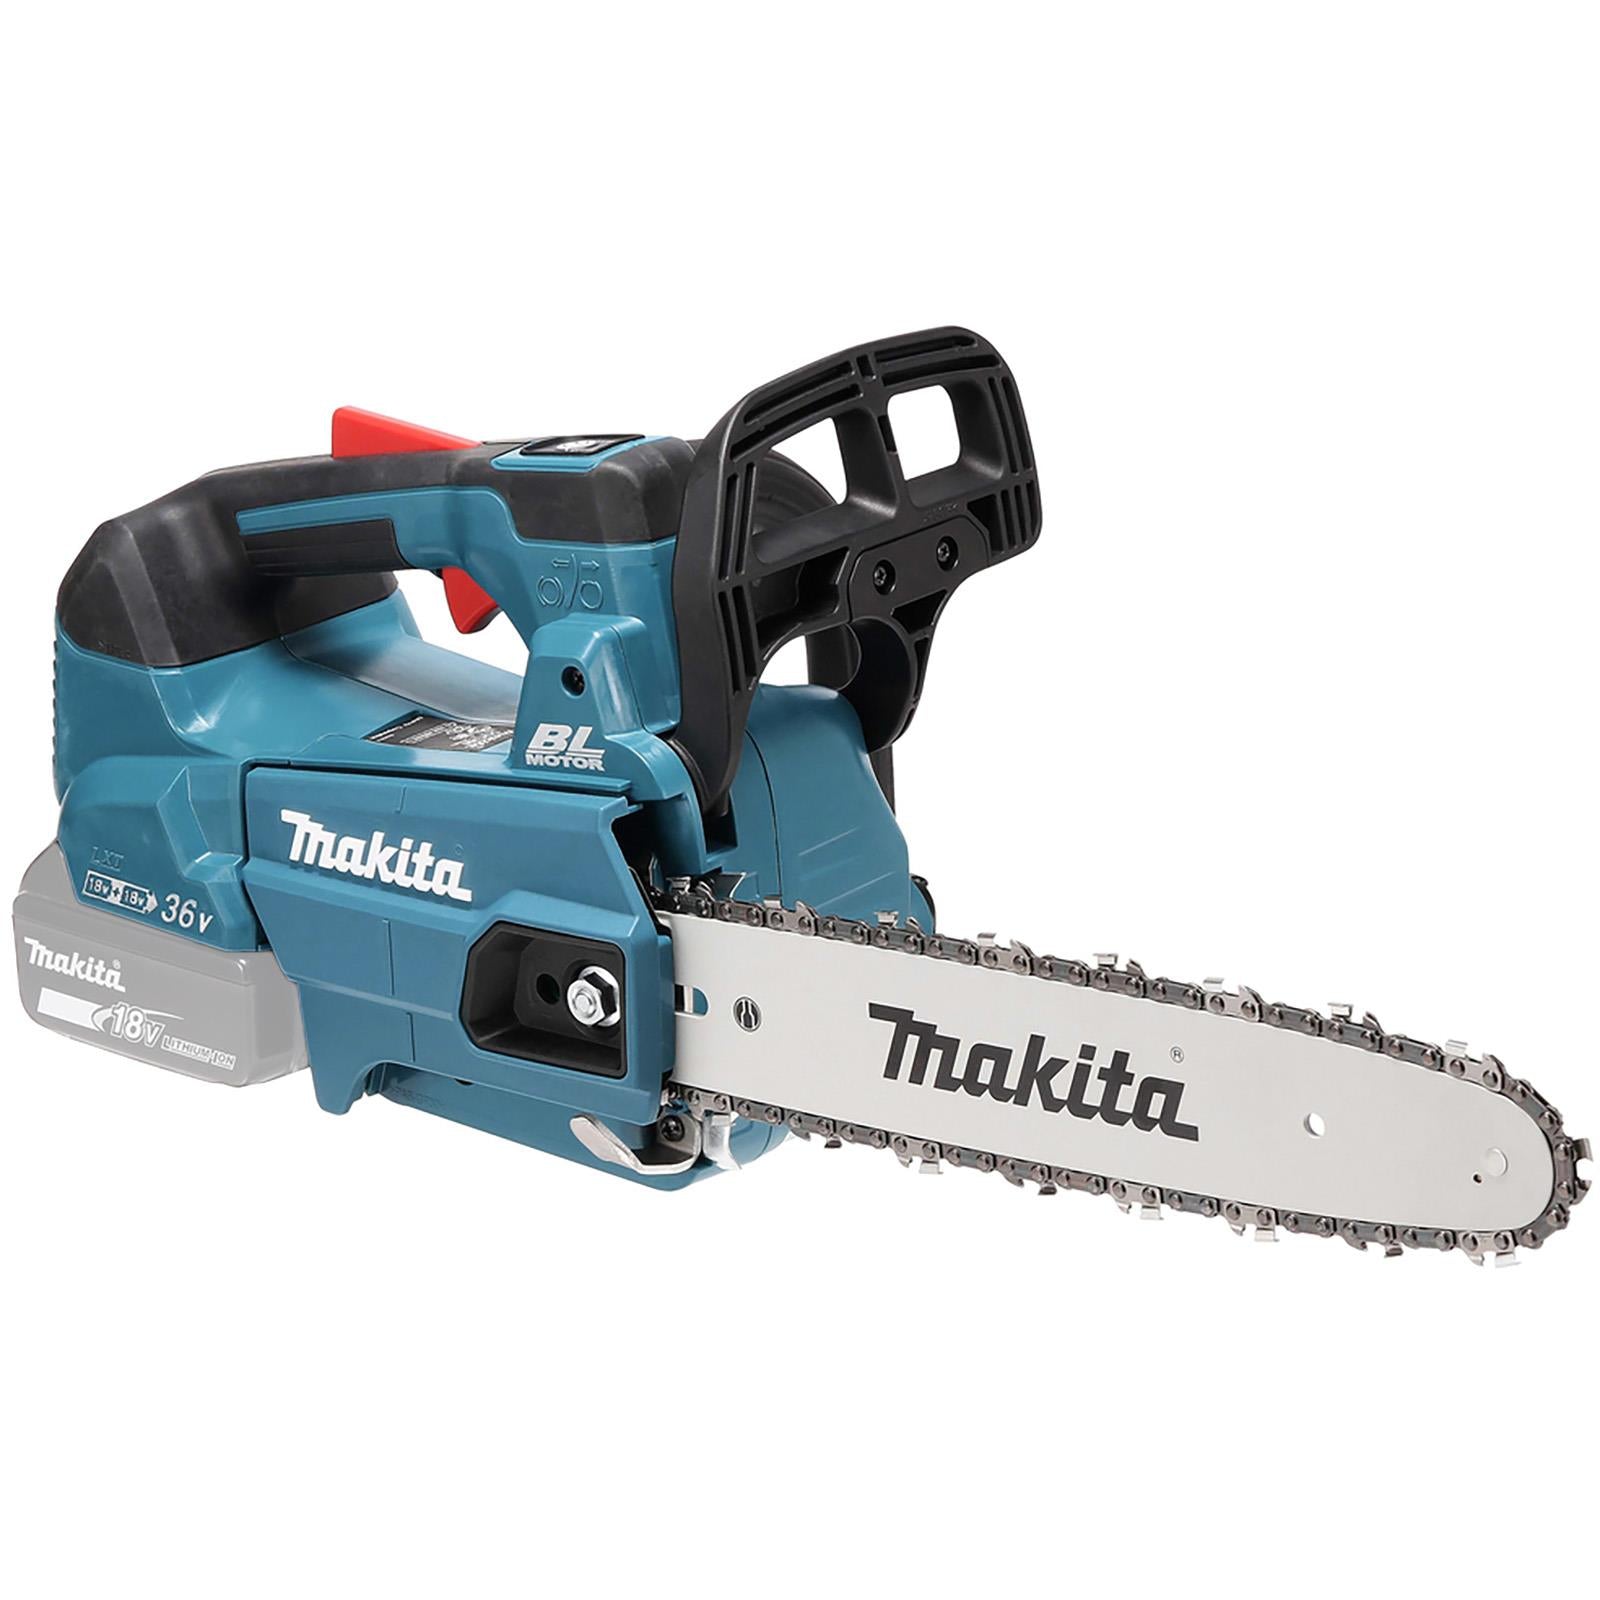 Makita Chainsaw 30cm 12" 18V x 2 LXT Brushless Cordless Top Handle Garden Tree Cutting Pruning Bare Unit Body Only DUC306PT2